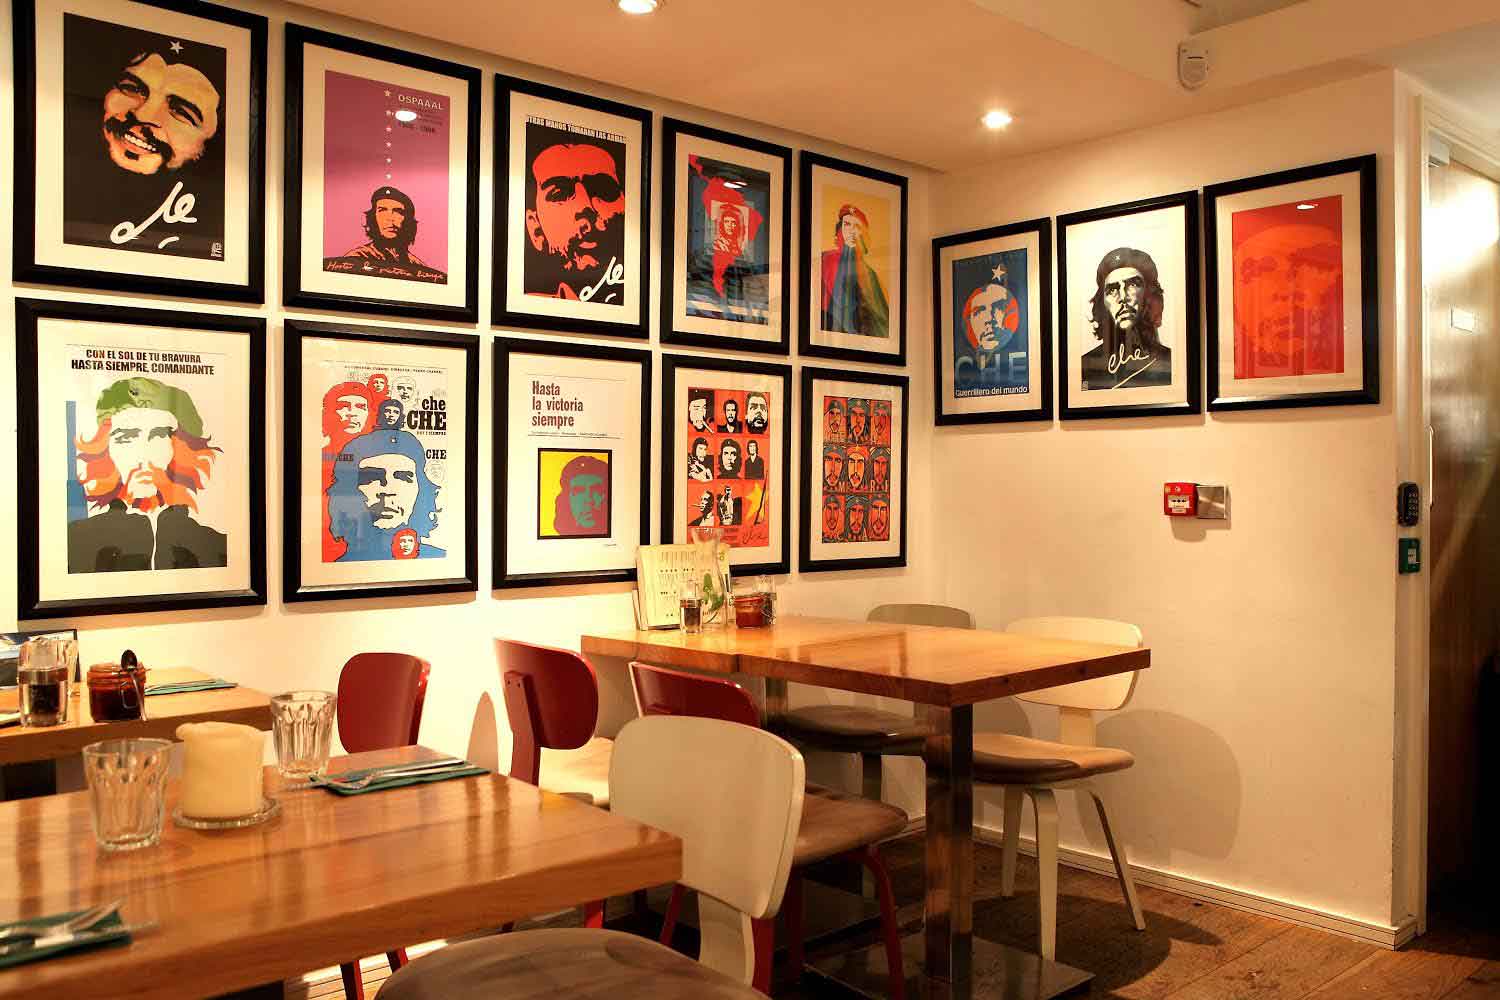 The Green 19 restaurant's walls cover with picture of Che designed by Dublin Design Studio